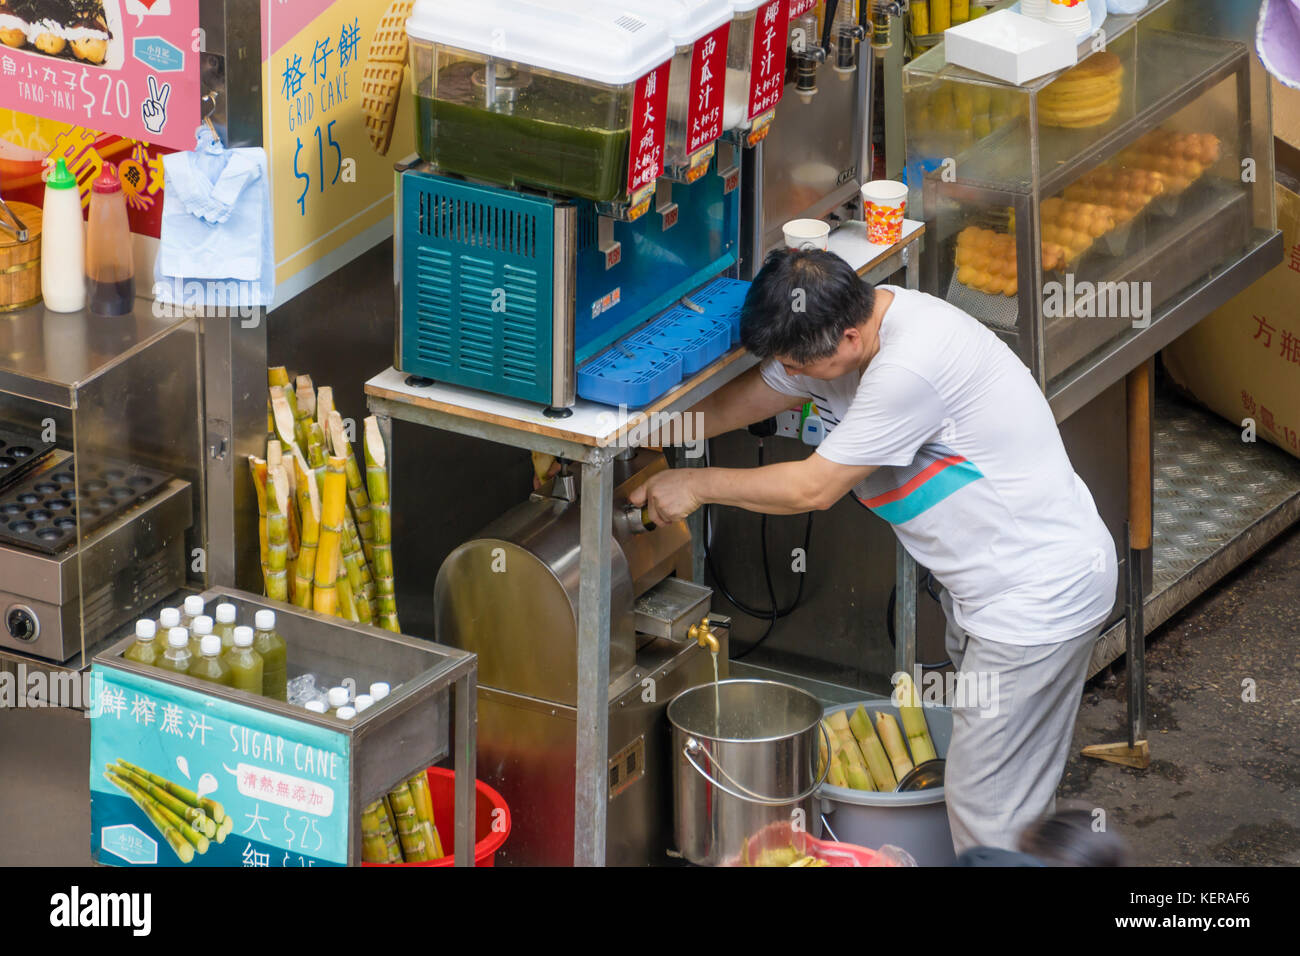 Food stall in Hong Kong selling drinks and street food Stock Photo